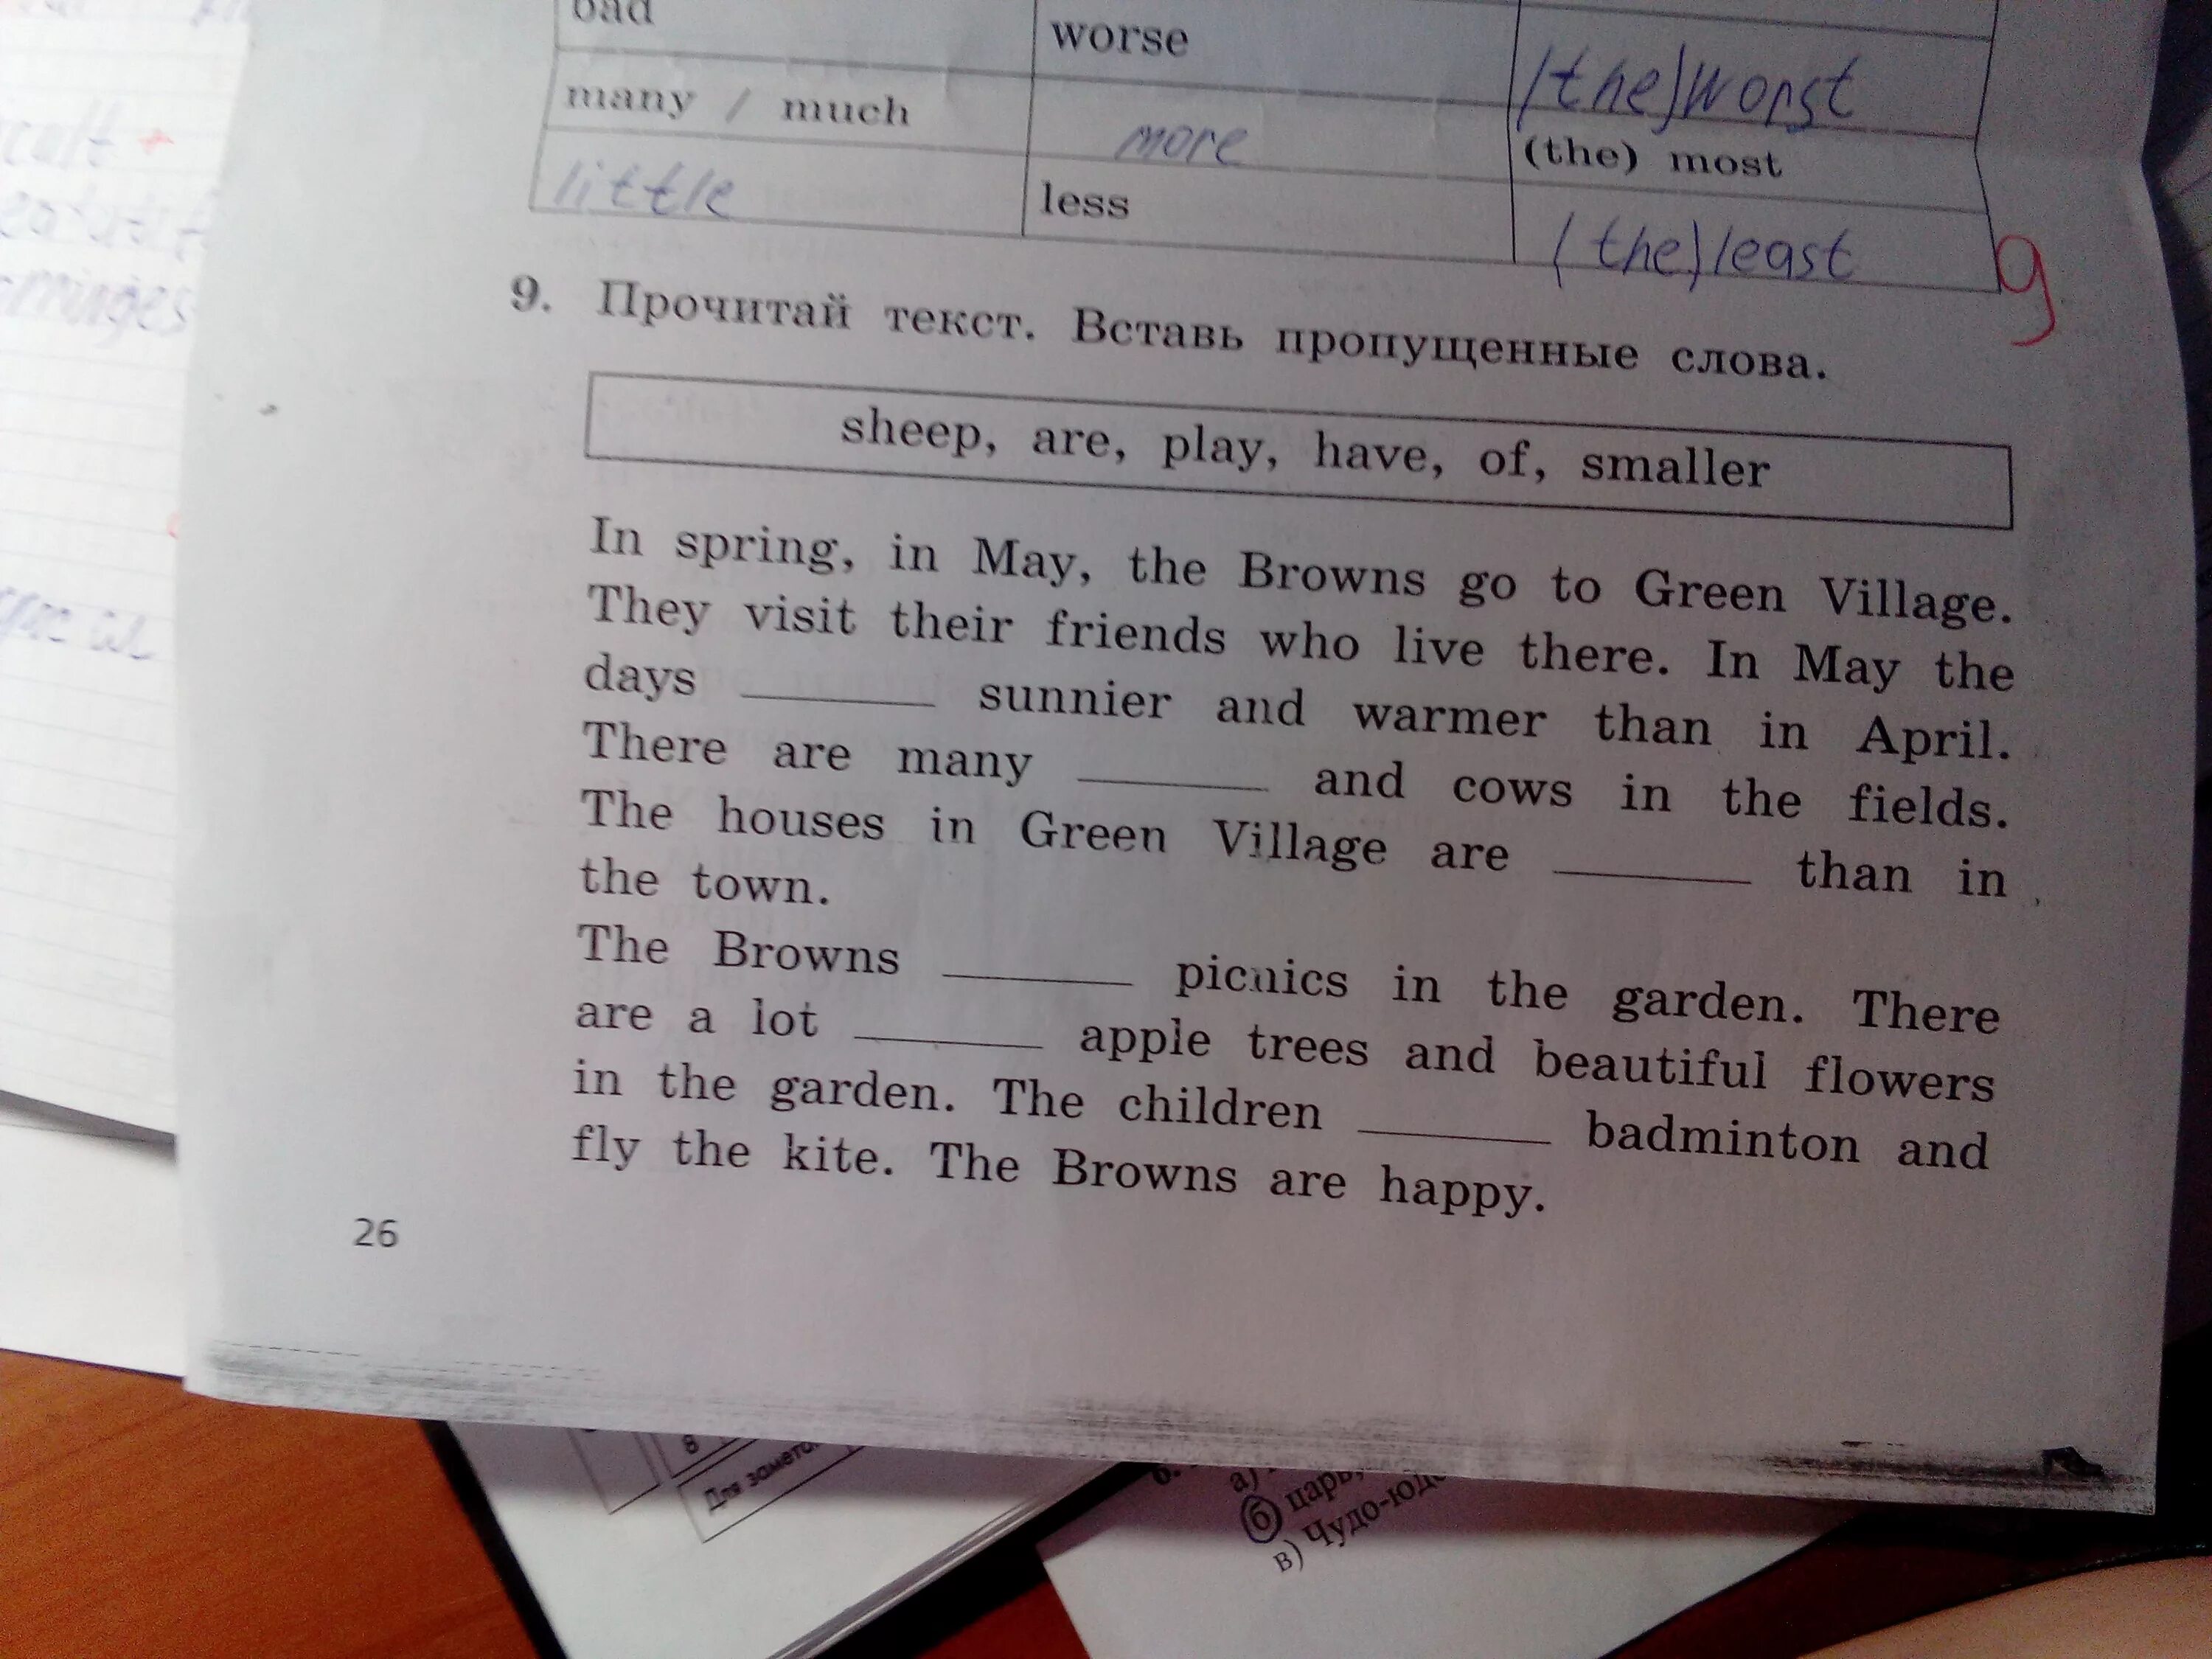 Прочитайте определения вставьте пропущенные слова. In Spring in May the Browns go to Green Village вставить пропущенные слова. Прочитай текст вставь пропущенные слова. Вставьте пропущенные слова was were. Вставьте пропущенные слова is and are and was and were.